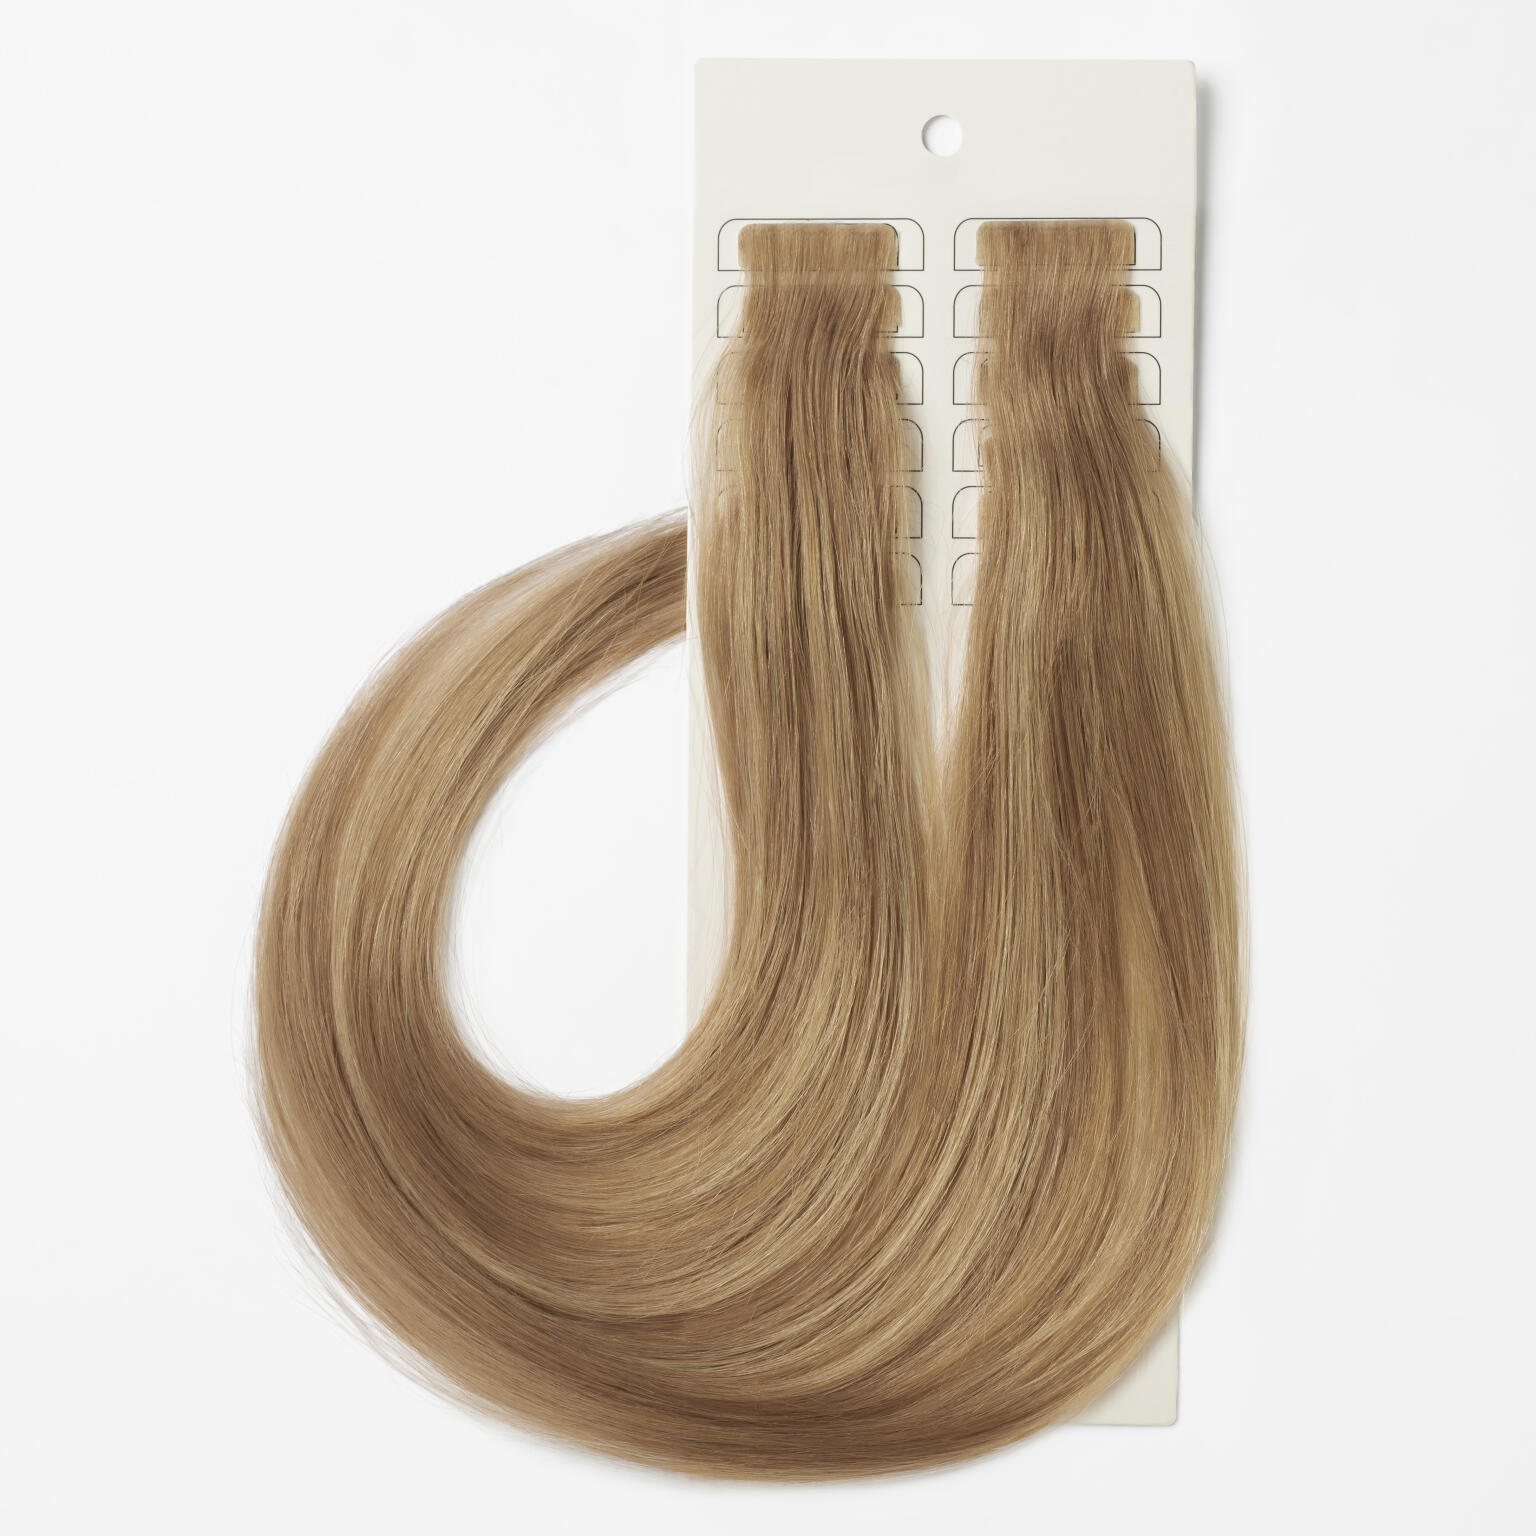 Luxe Tape Extensions Seamless 3 CM9.89/10.89 60 cm